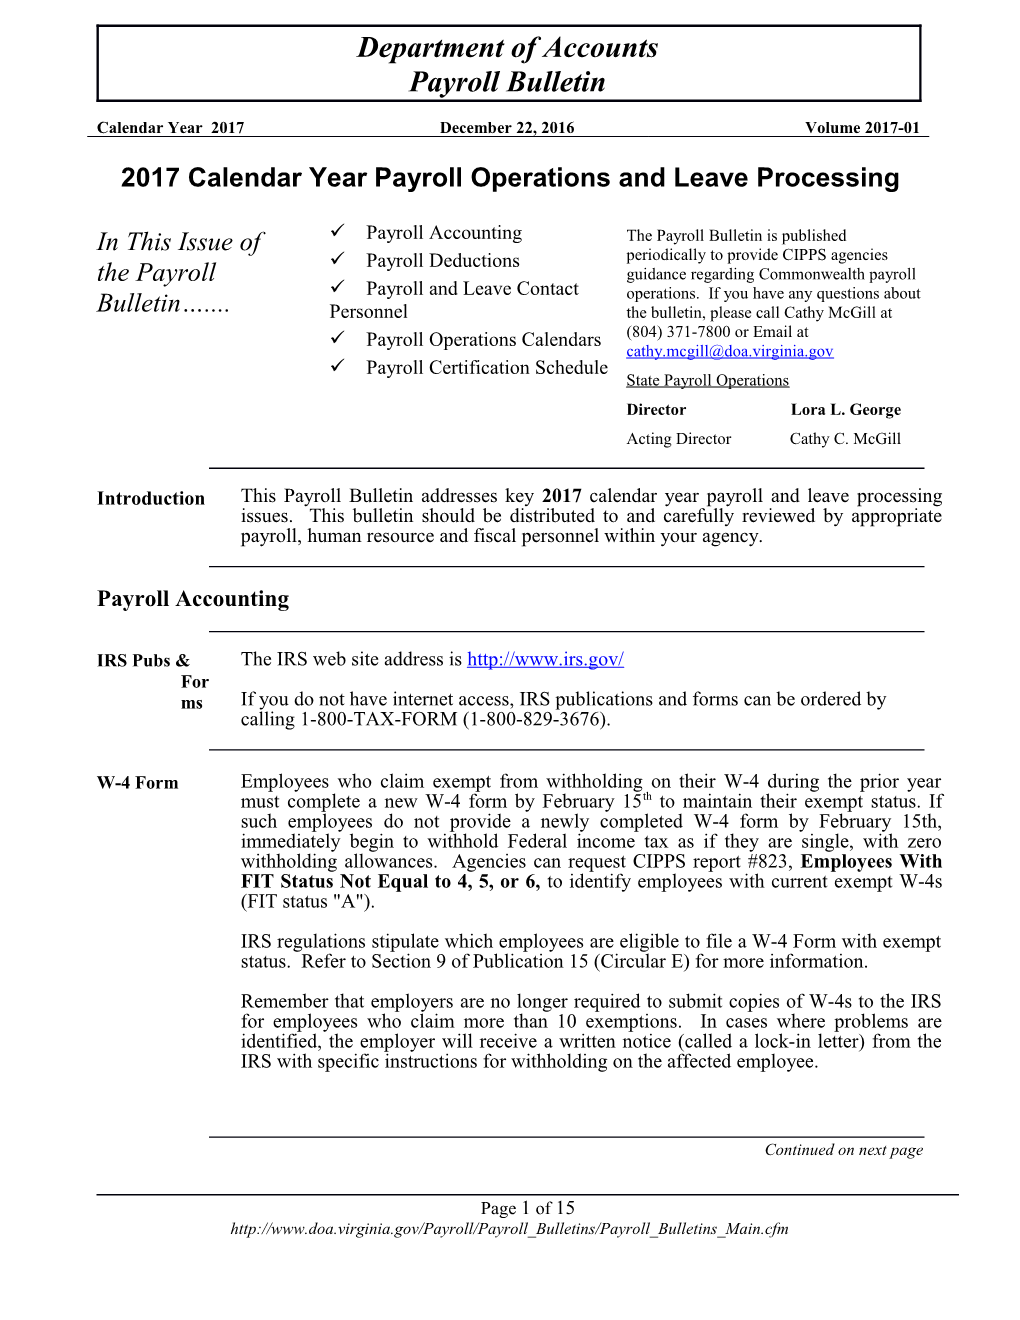 2017 Calendar Year Payroll Operations and Leave Processing